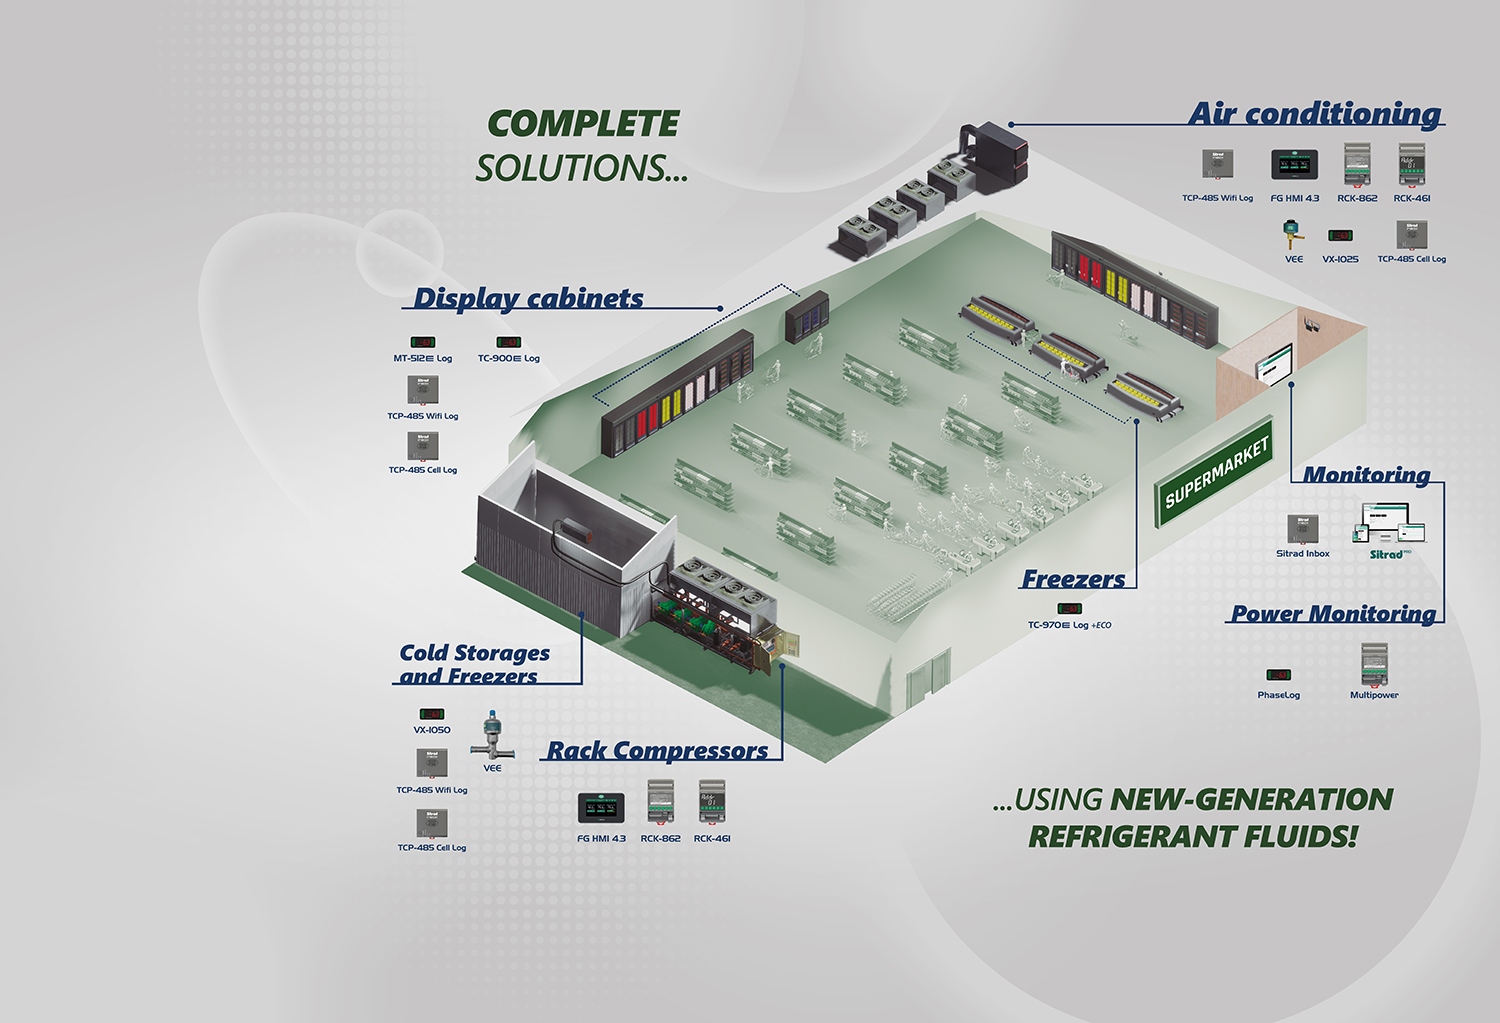 Electronic Controllers for Chillers, EEV, Refrigeration and remote management solutions